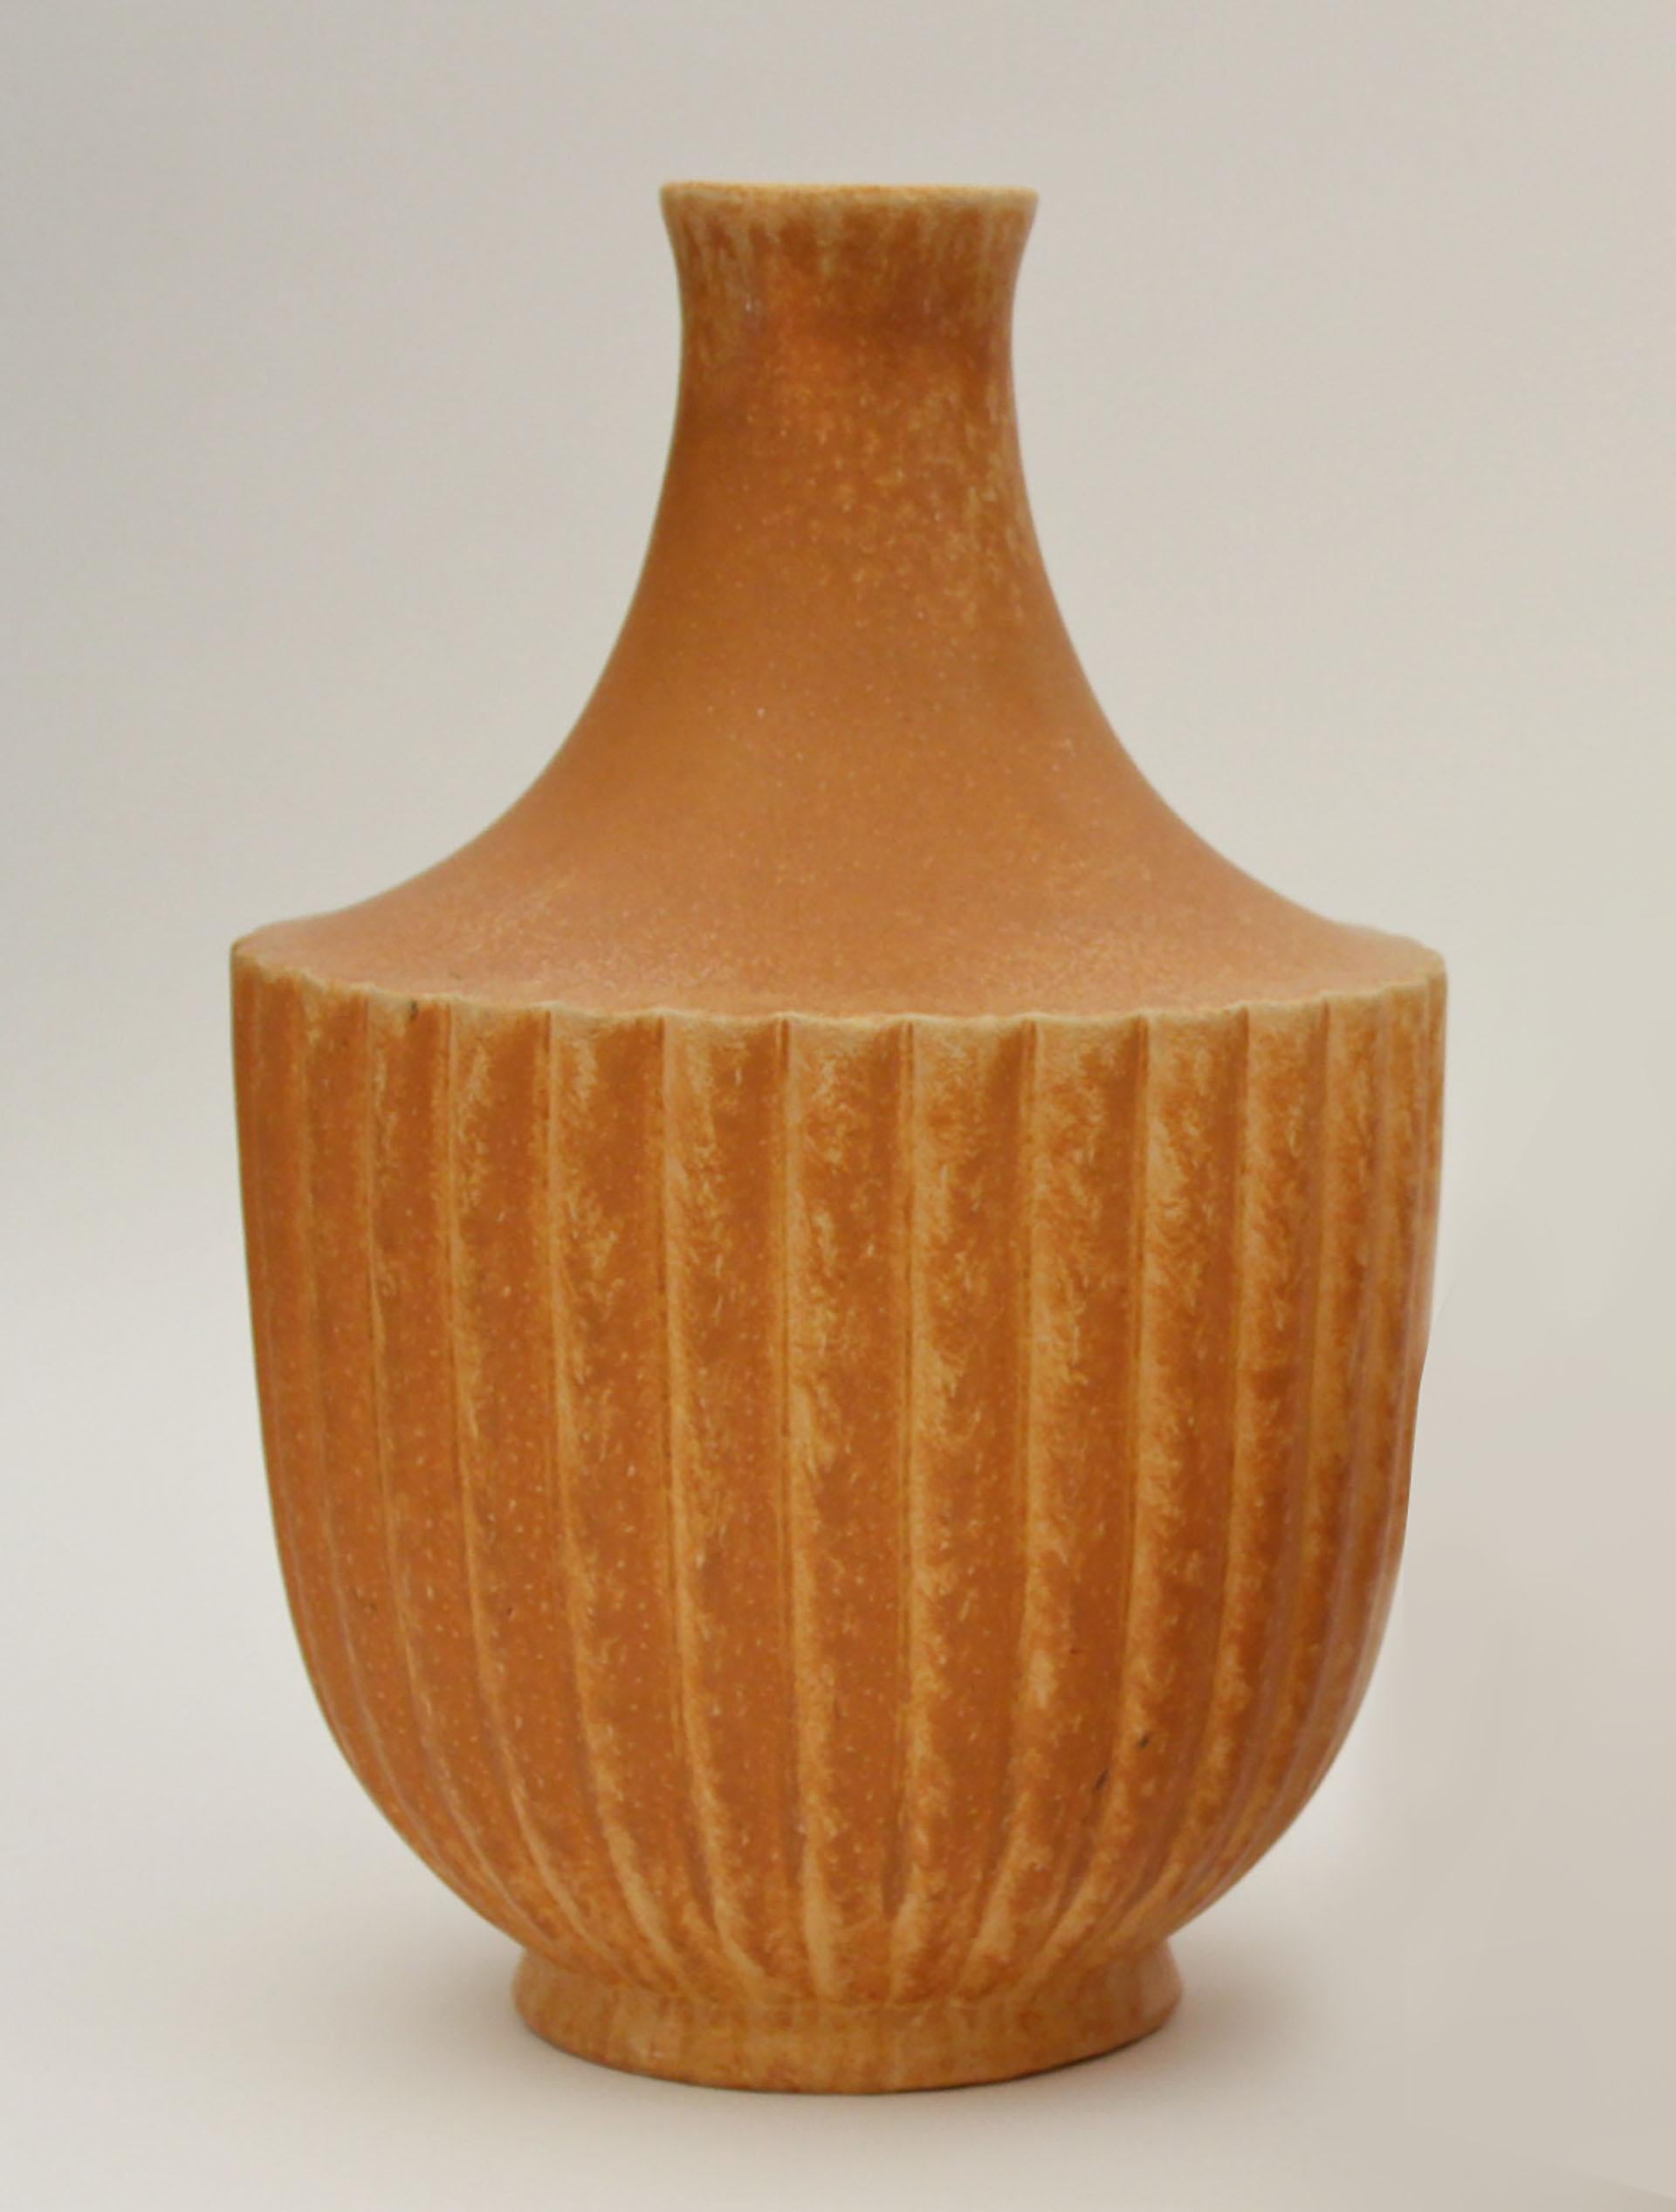 Of neoclassic) form, fluted body, orange glaze. Firms marks (Presentation piece for crafts competition.
     